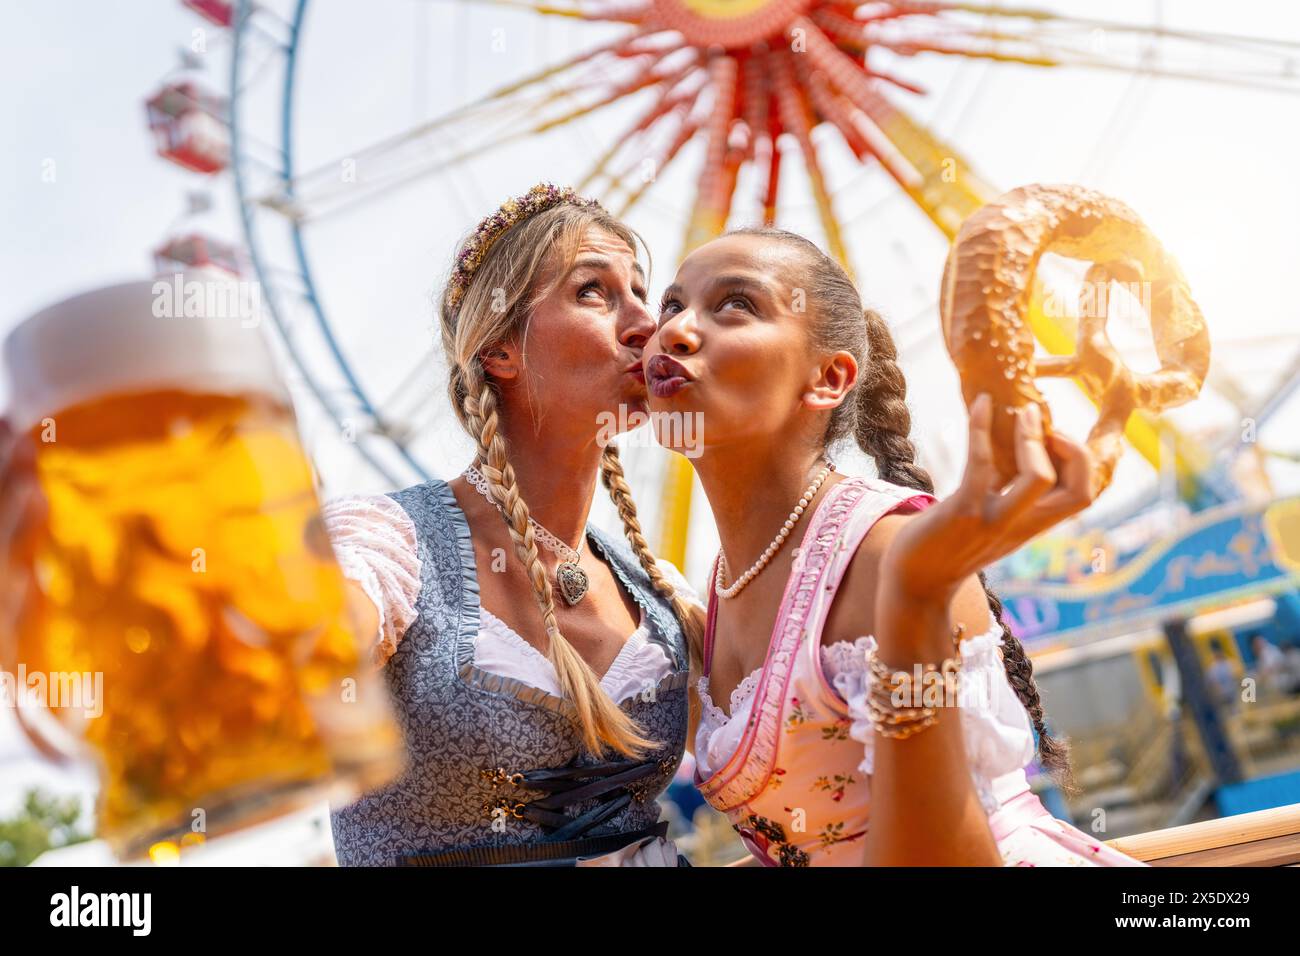 Girlfriends in a traditional Bavarian dress tracht gives her friend a kiss on the cheek, holding beer and a pretzel at oktoberfest or duld in germany Stock Photo